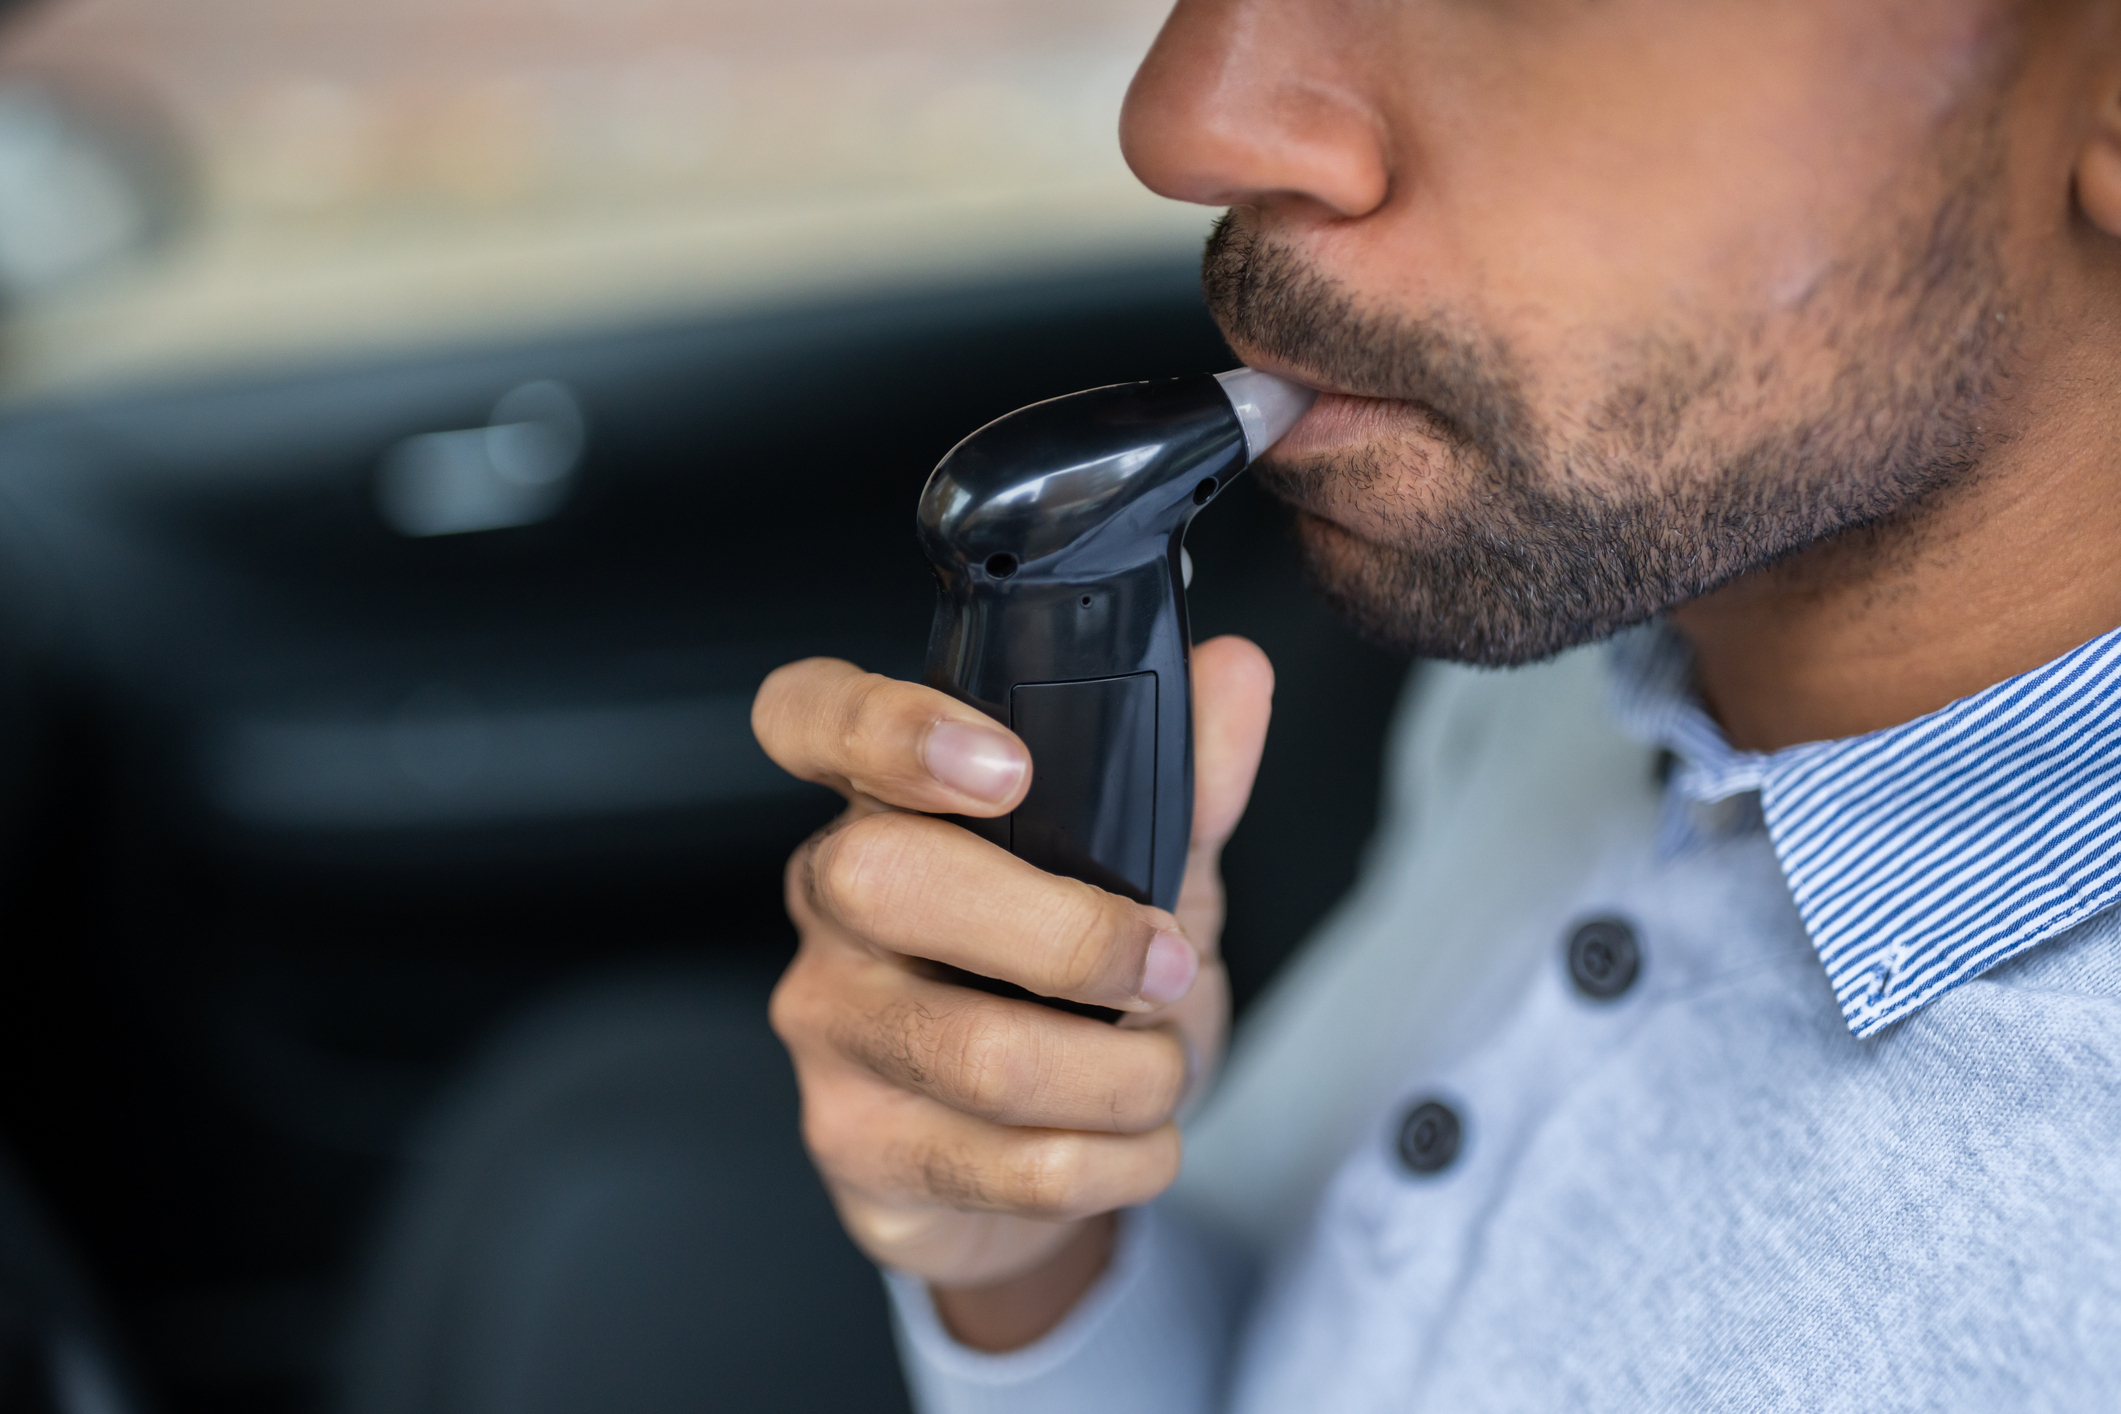 Person using a breathalyzer device in a car